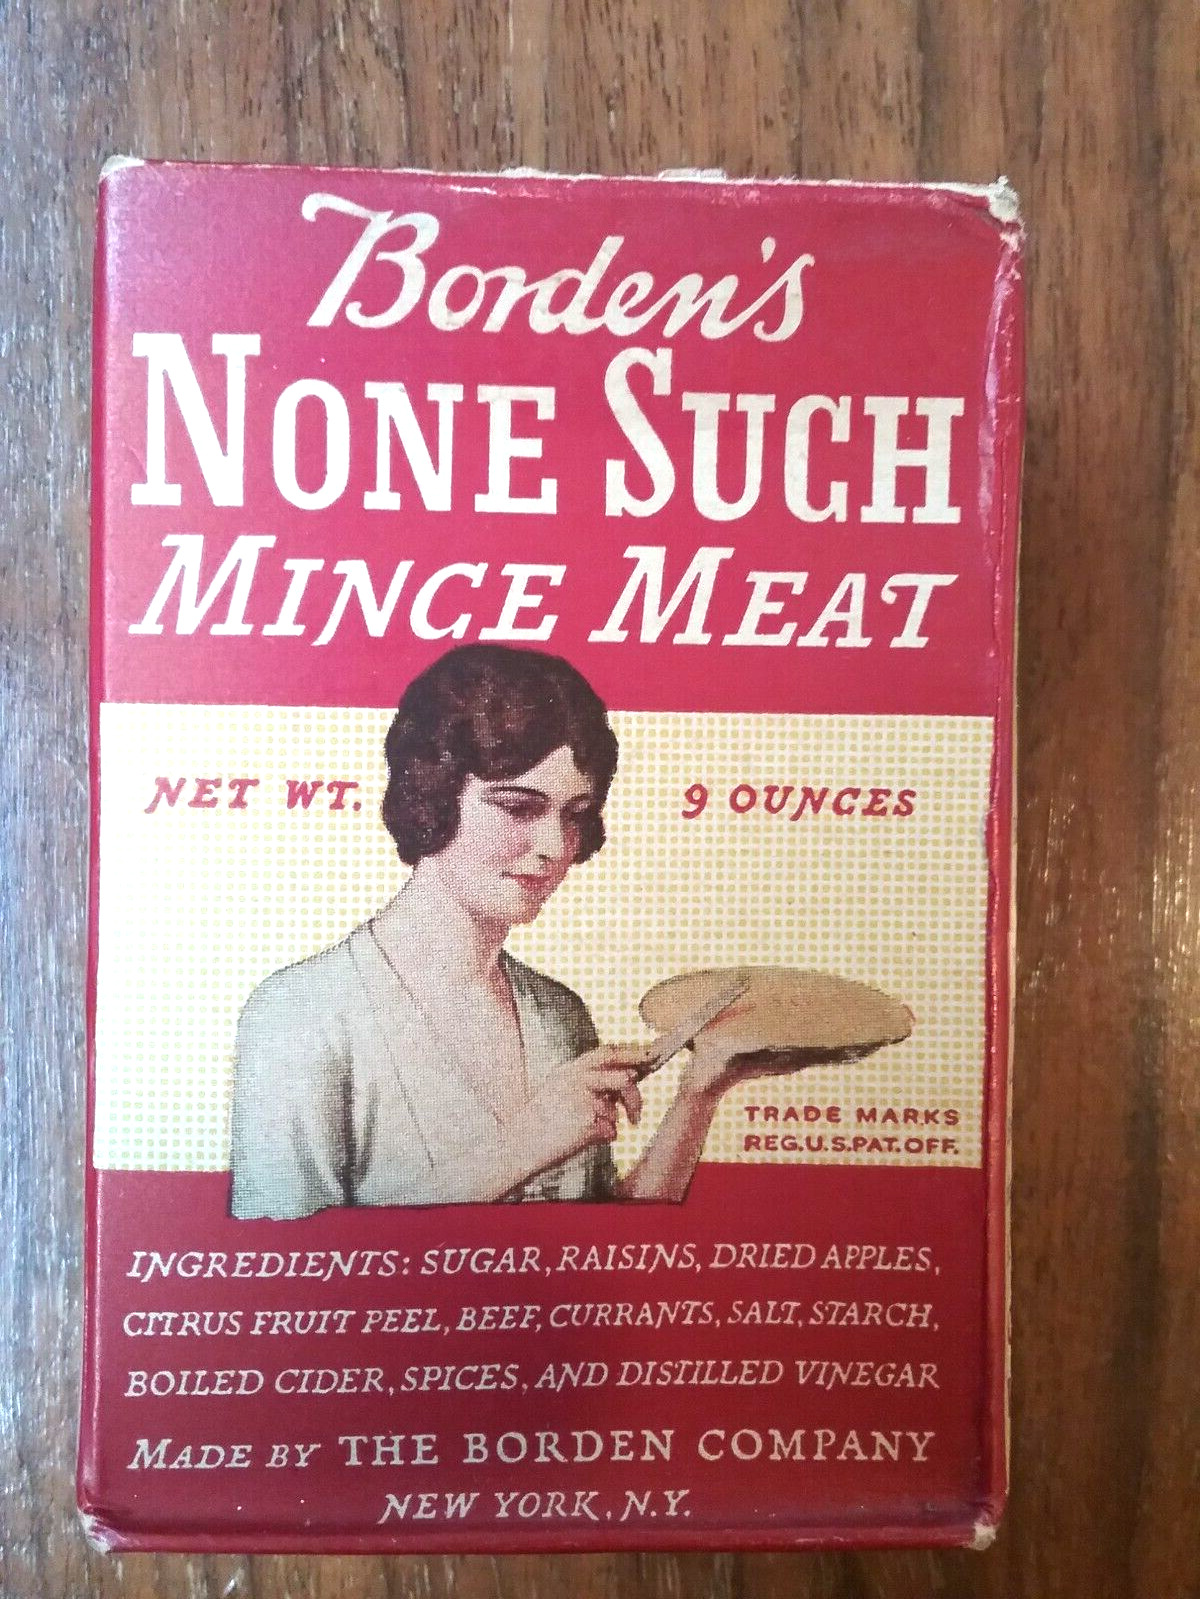 VINTAGE 1939 BORDEN'S NONE SUCH MINCEMEAT BOX,  NOS DISPLAY, PROP, ADVERTISING